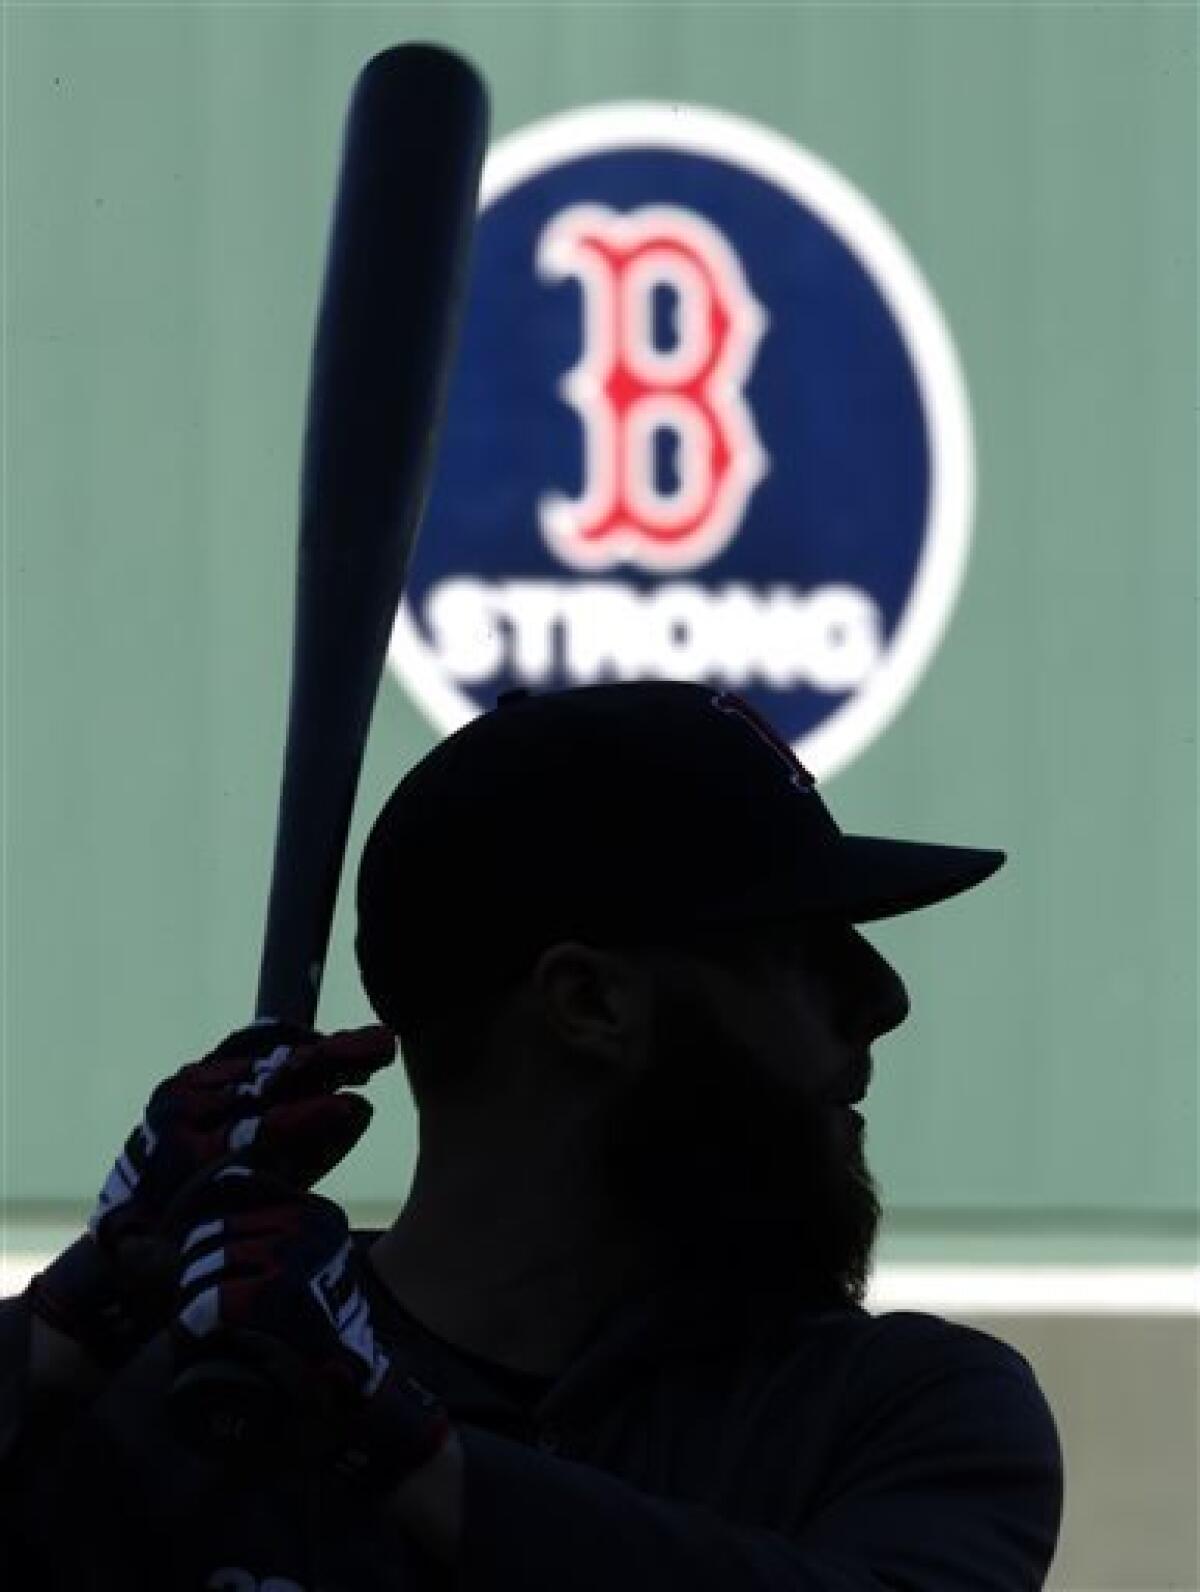 WORLD SERIES PREVIEW: Boston Strong: Red Sox ride wave of good